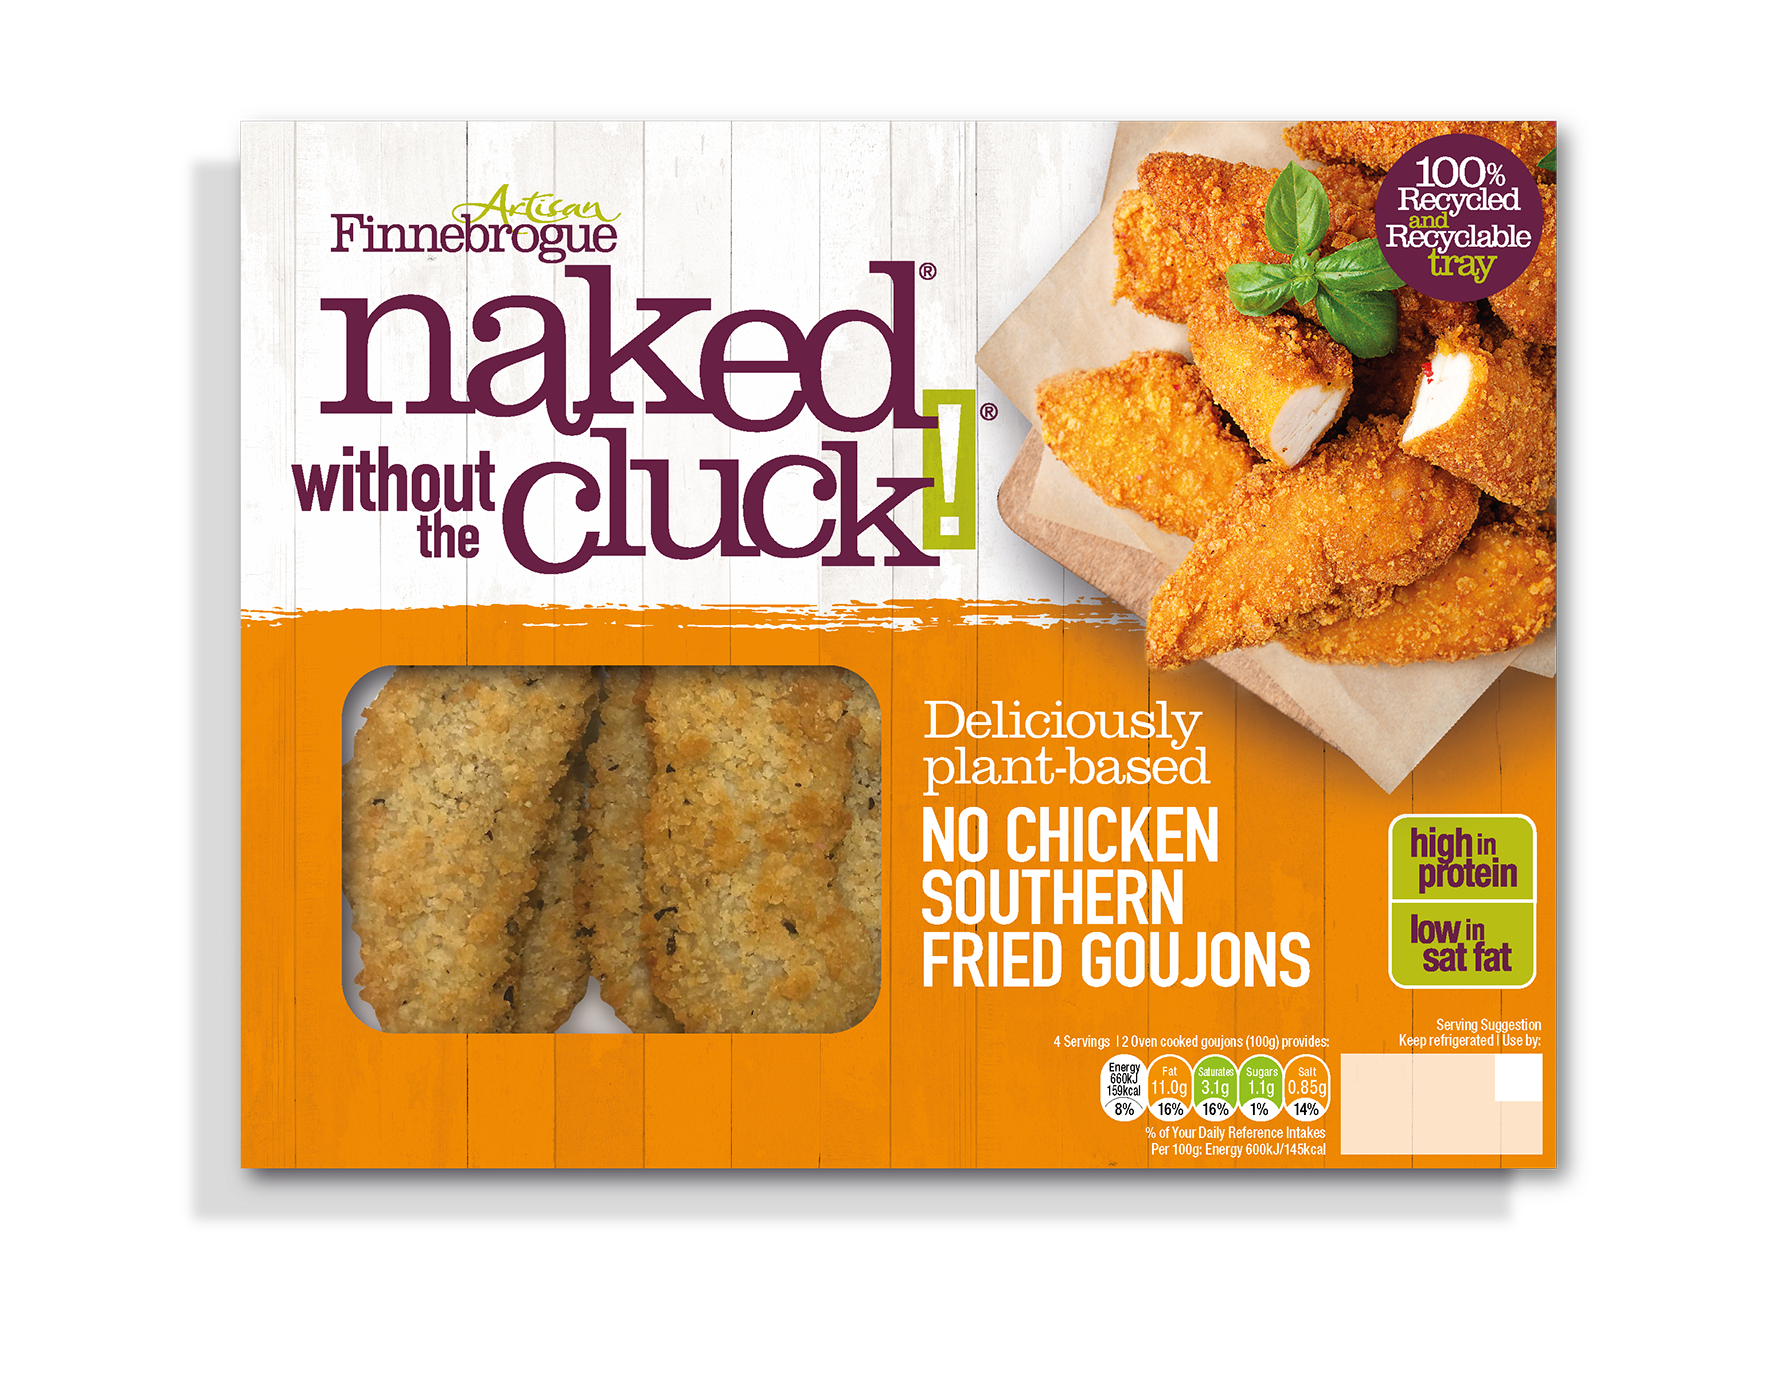 Naked without the cluck plant-based nuggets from Naked Finnebrogue.